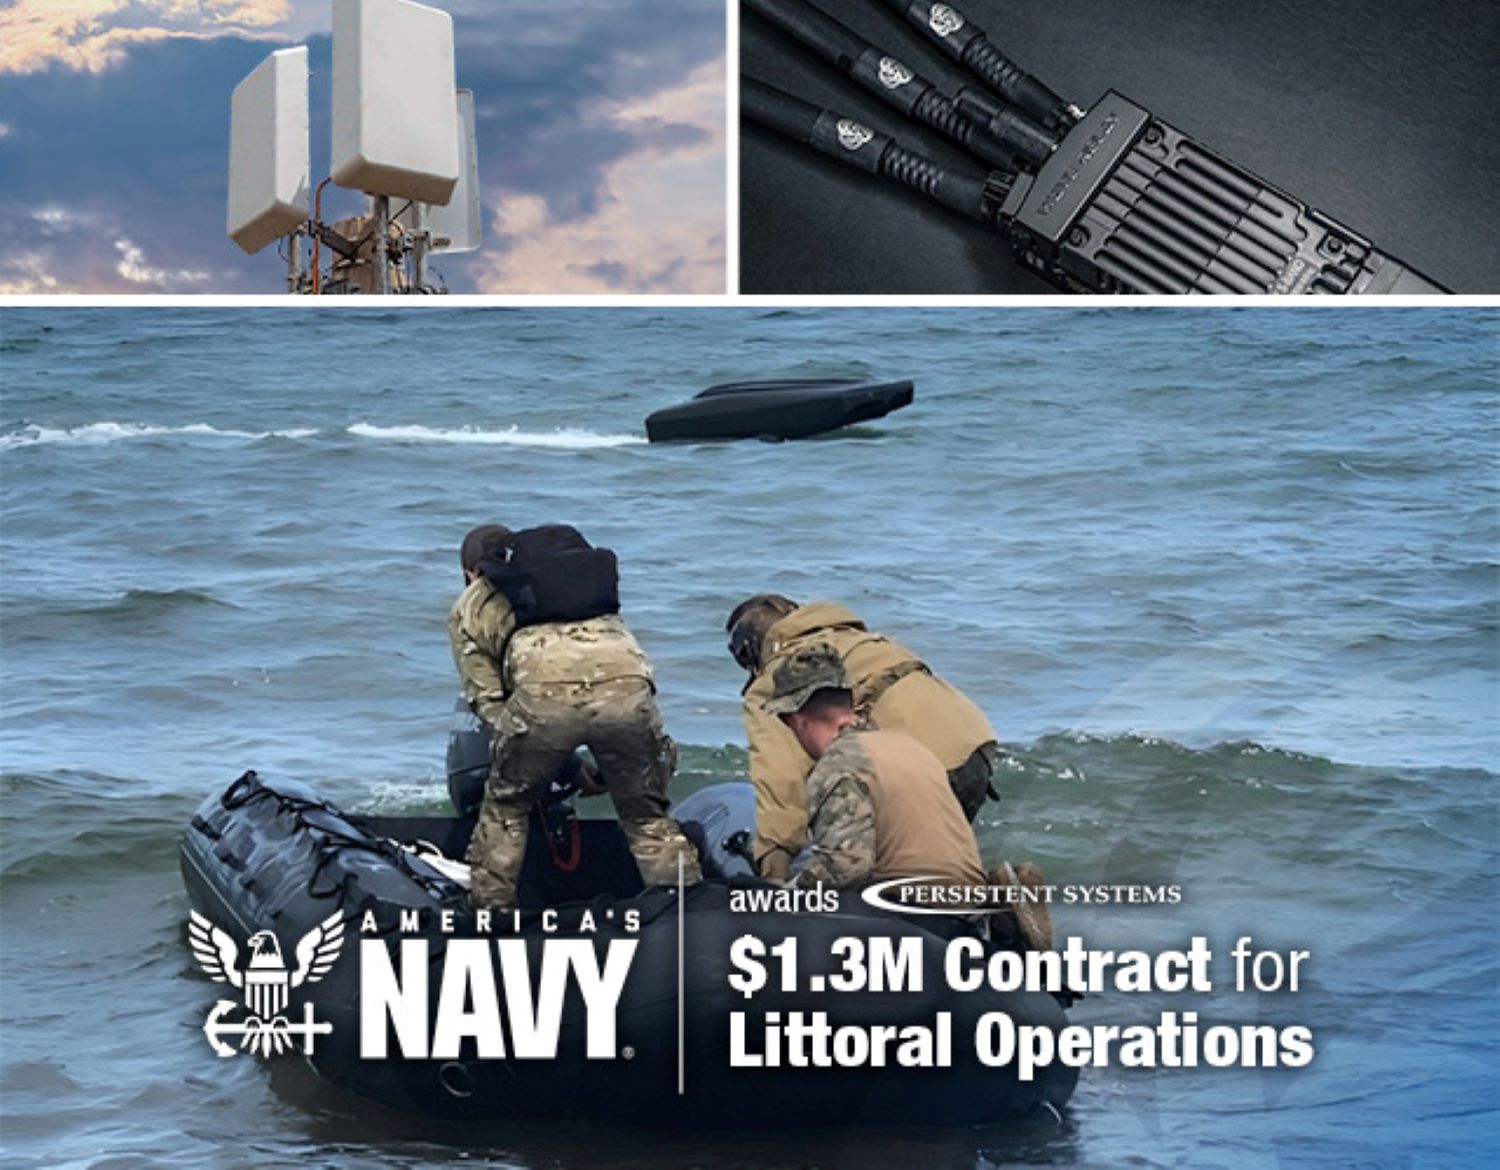 U.S. Navy Acquires Networking Devices from Persistent Systems for Littoral Operations